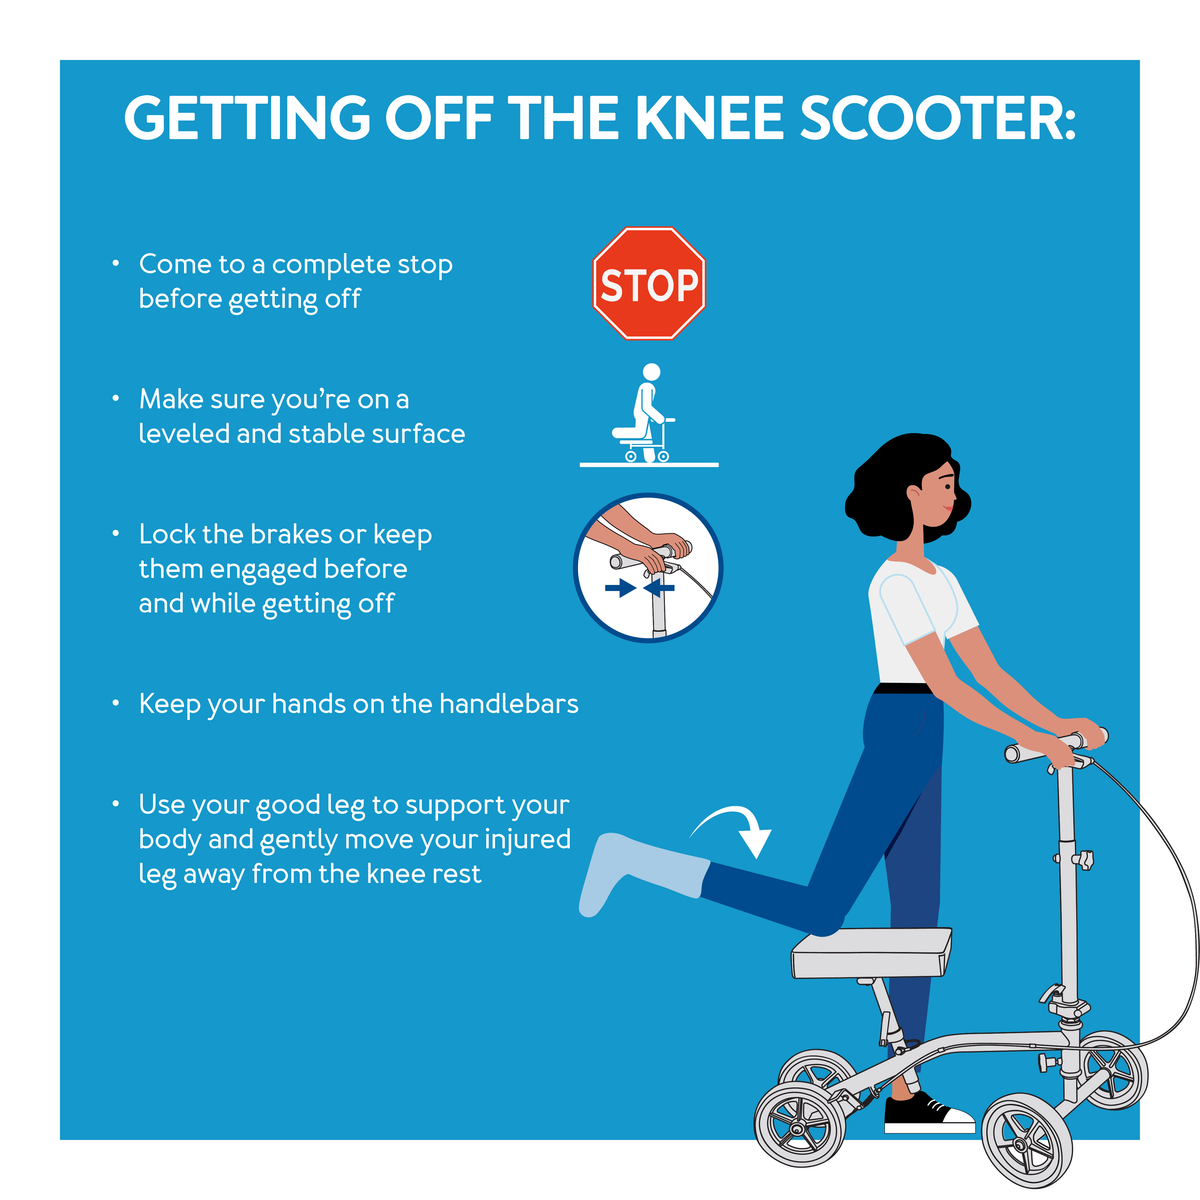 How to get off a knee scooter, further details are provided below.